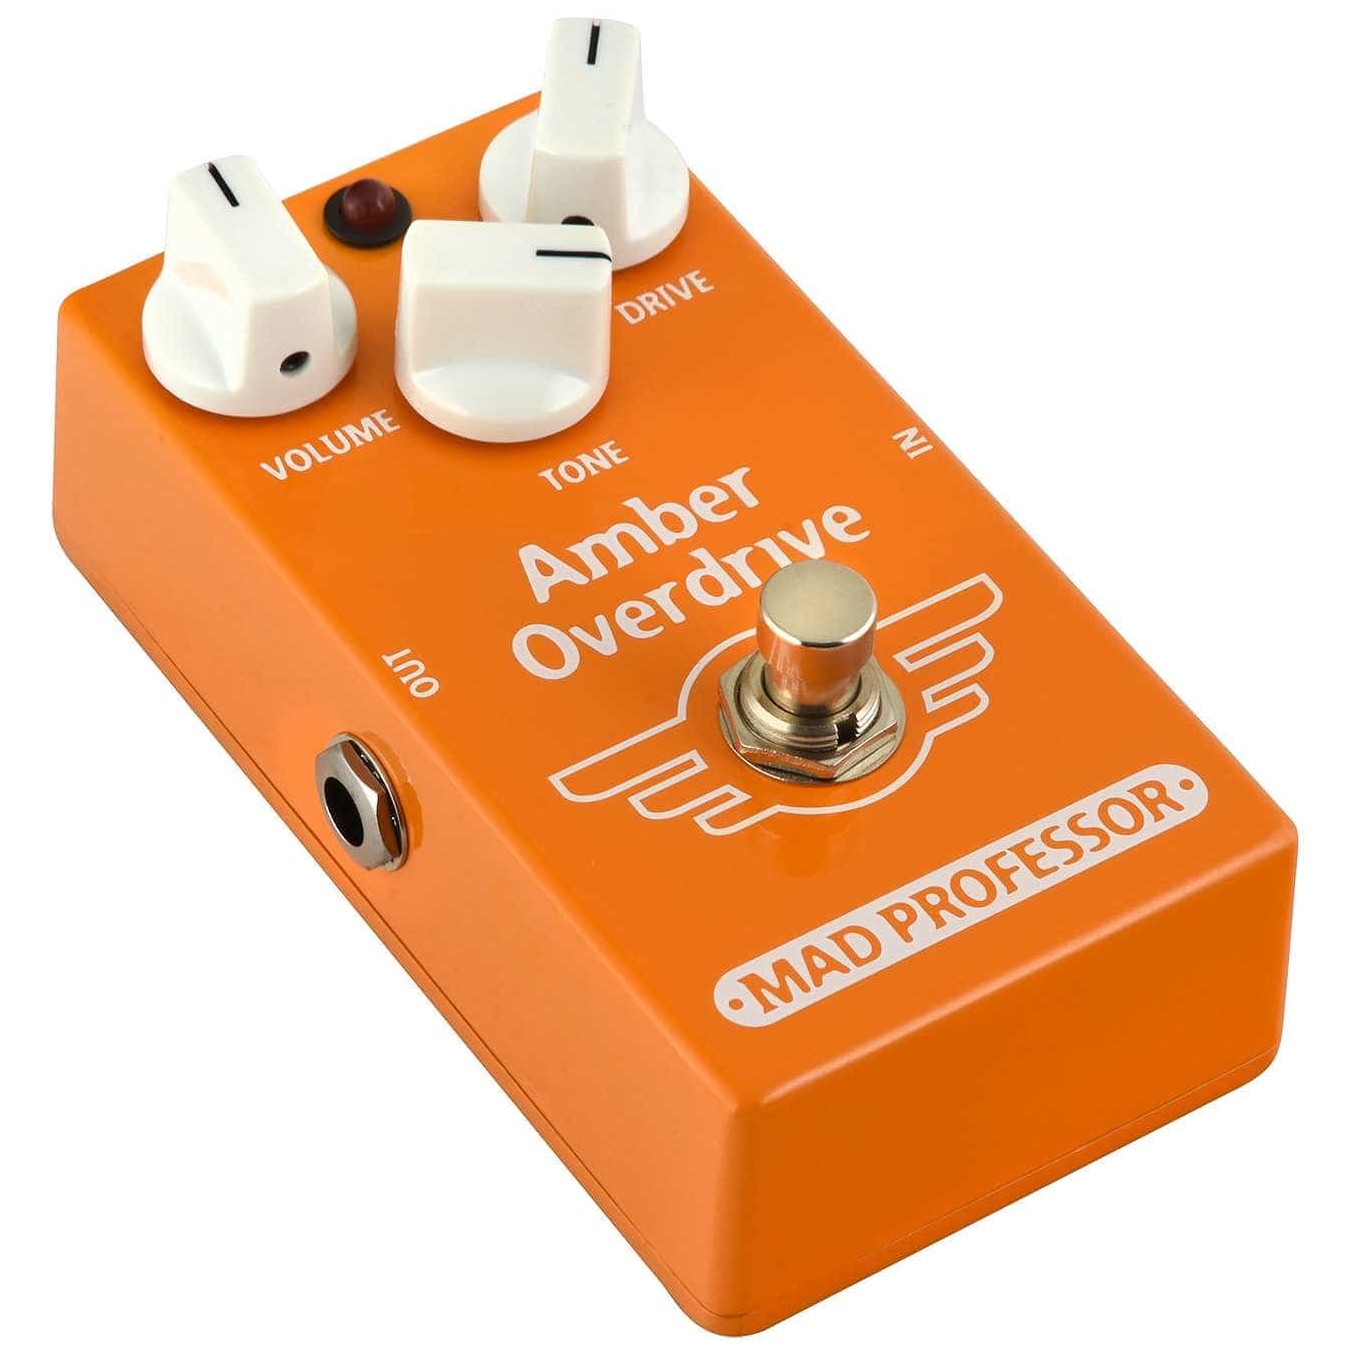 Mad Professor Amber Overdrive Factory